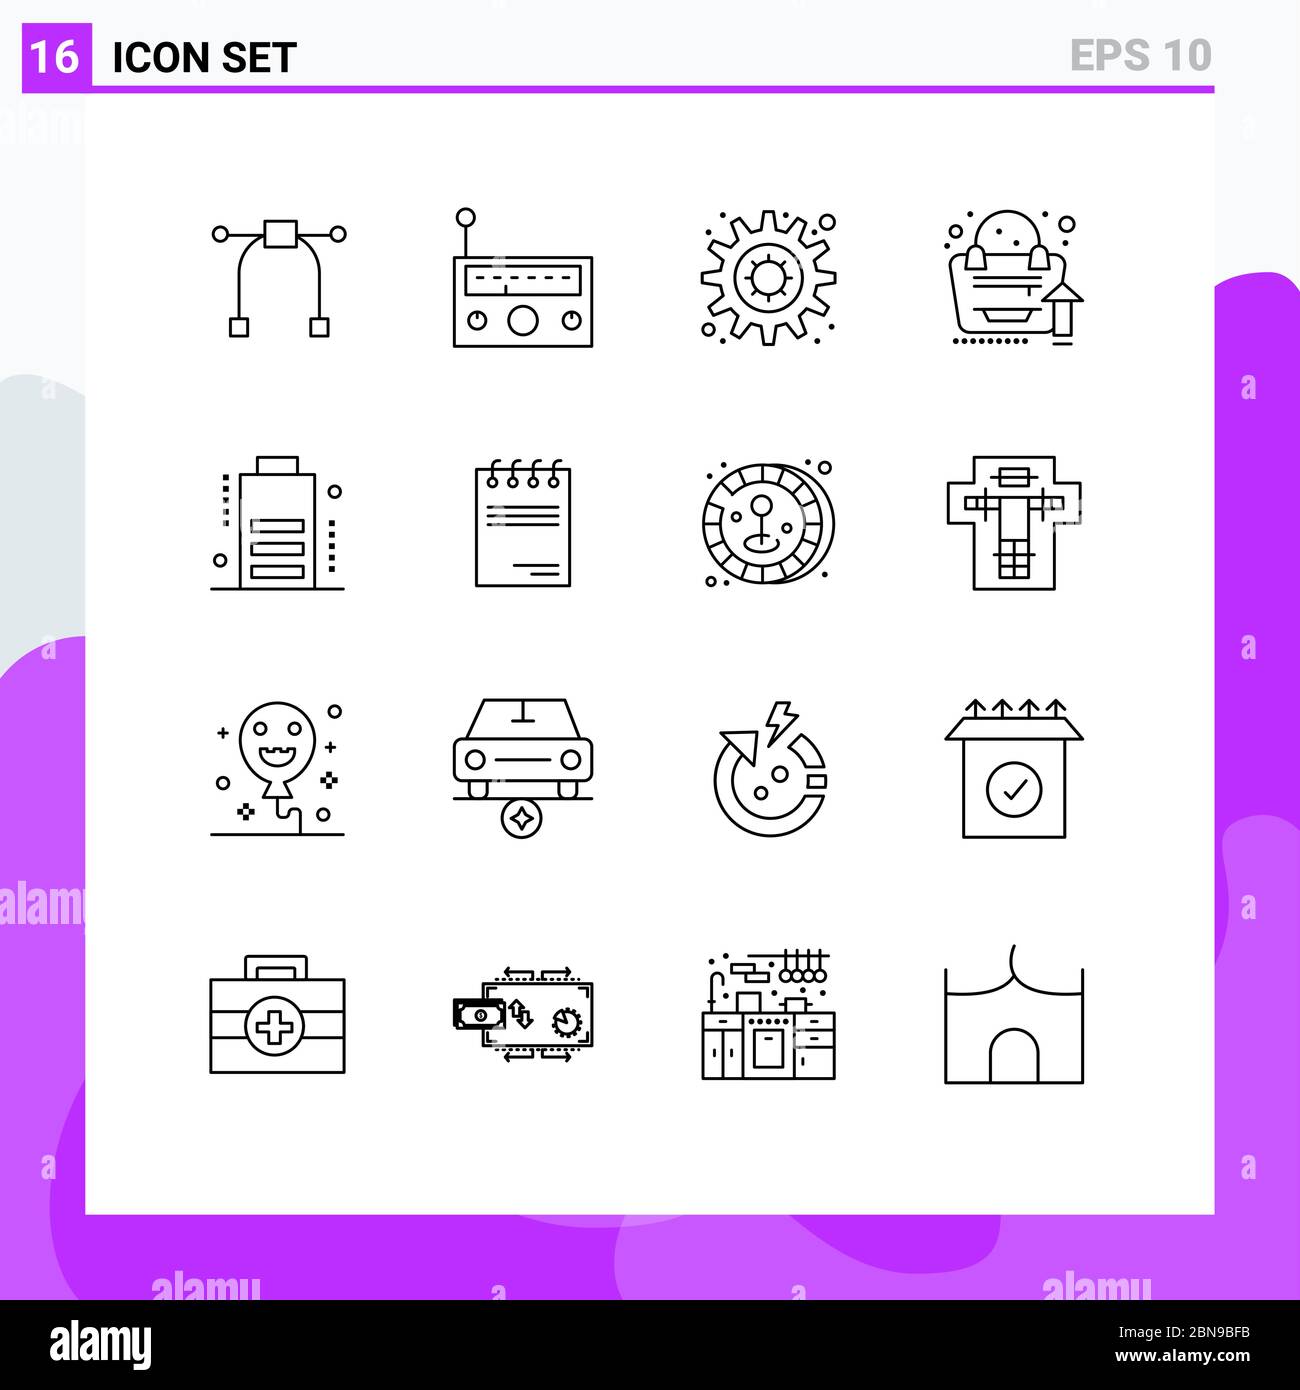 16 Creative Icons Modern Signs and Symbols of notepad, charge, motivation, battery, bag Editable Vector Design Elements Stock Vector